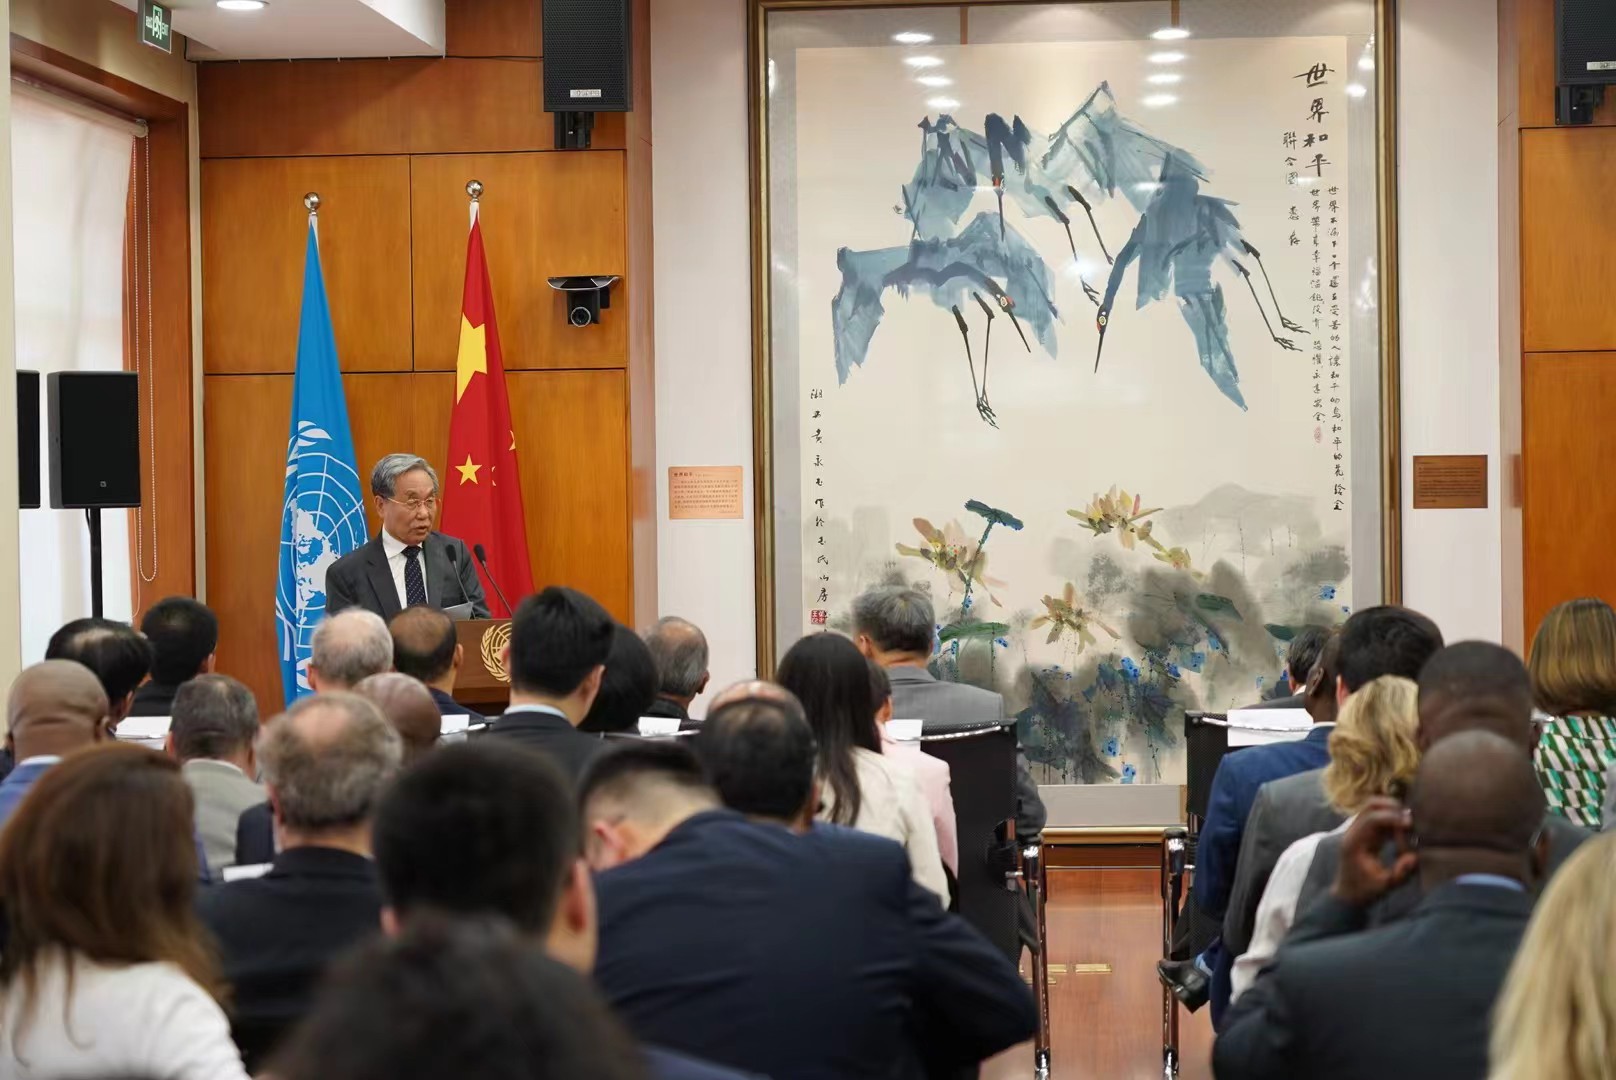 Zhang Zhixiang’s Speech at the Sustainable Development Goals Seminar Organized by the Ministry of Foreign Affairs And the United Nations Resident Coordinator Office in China (Full Text)